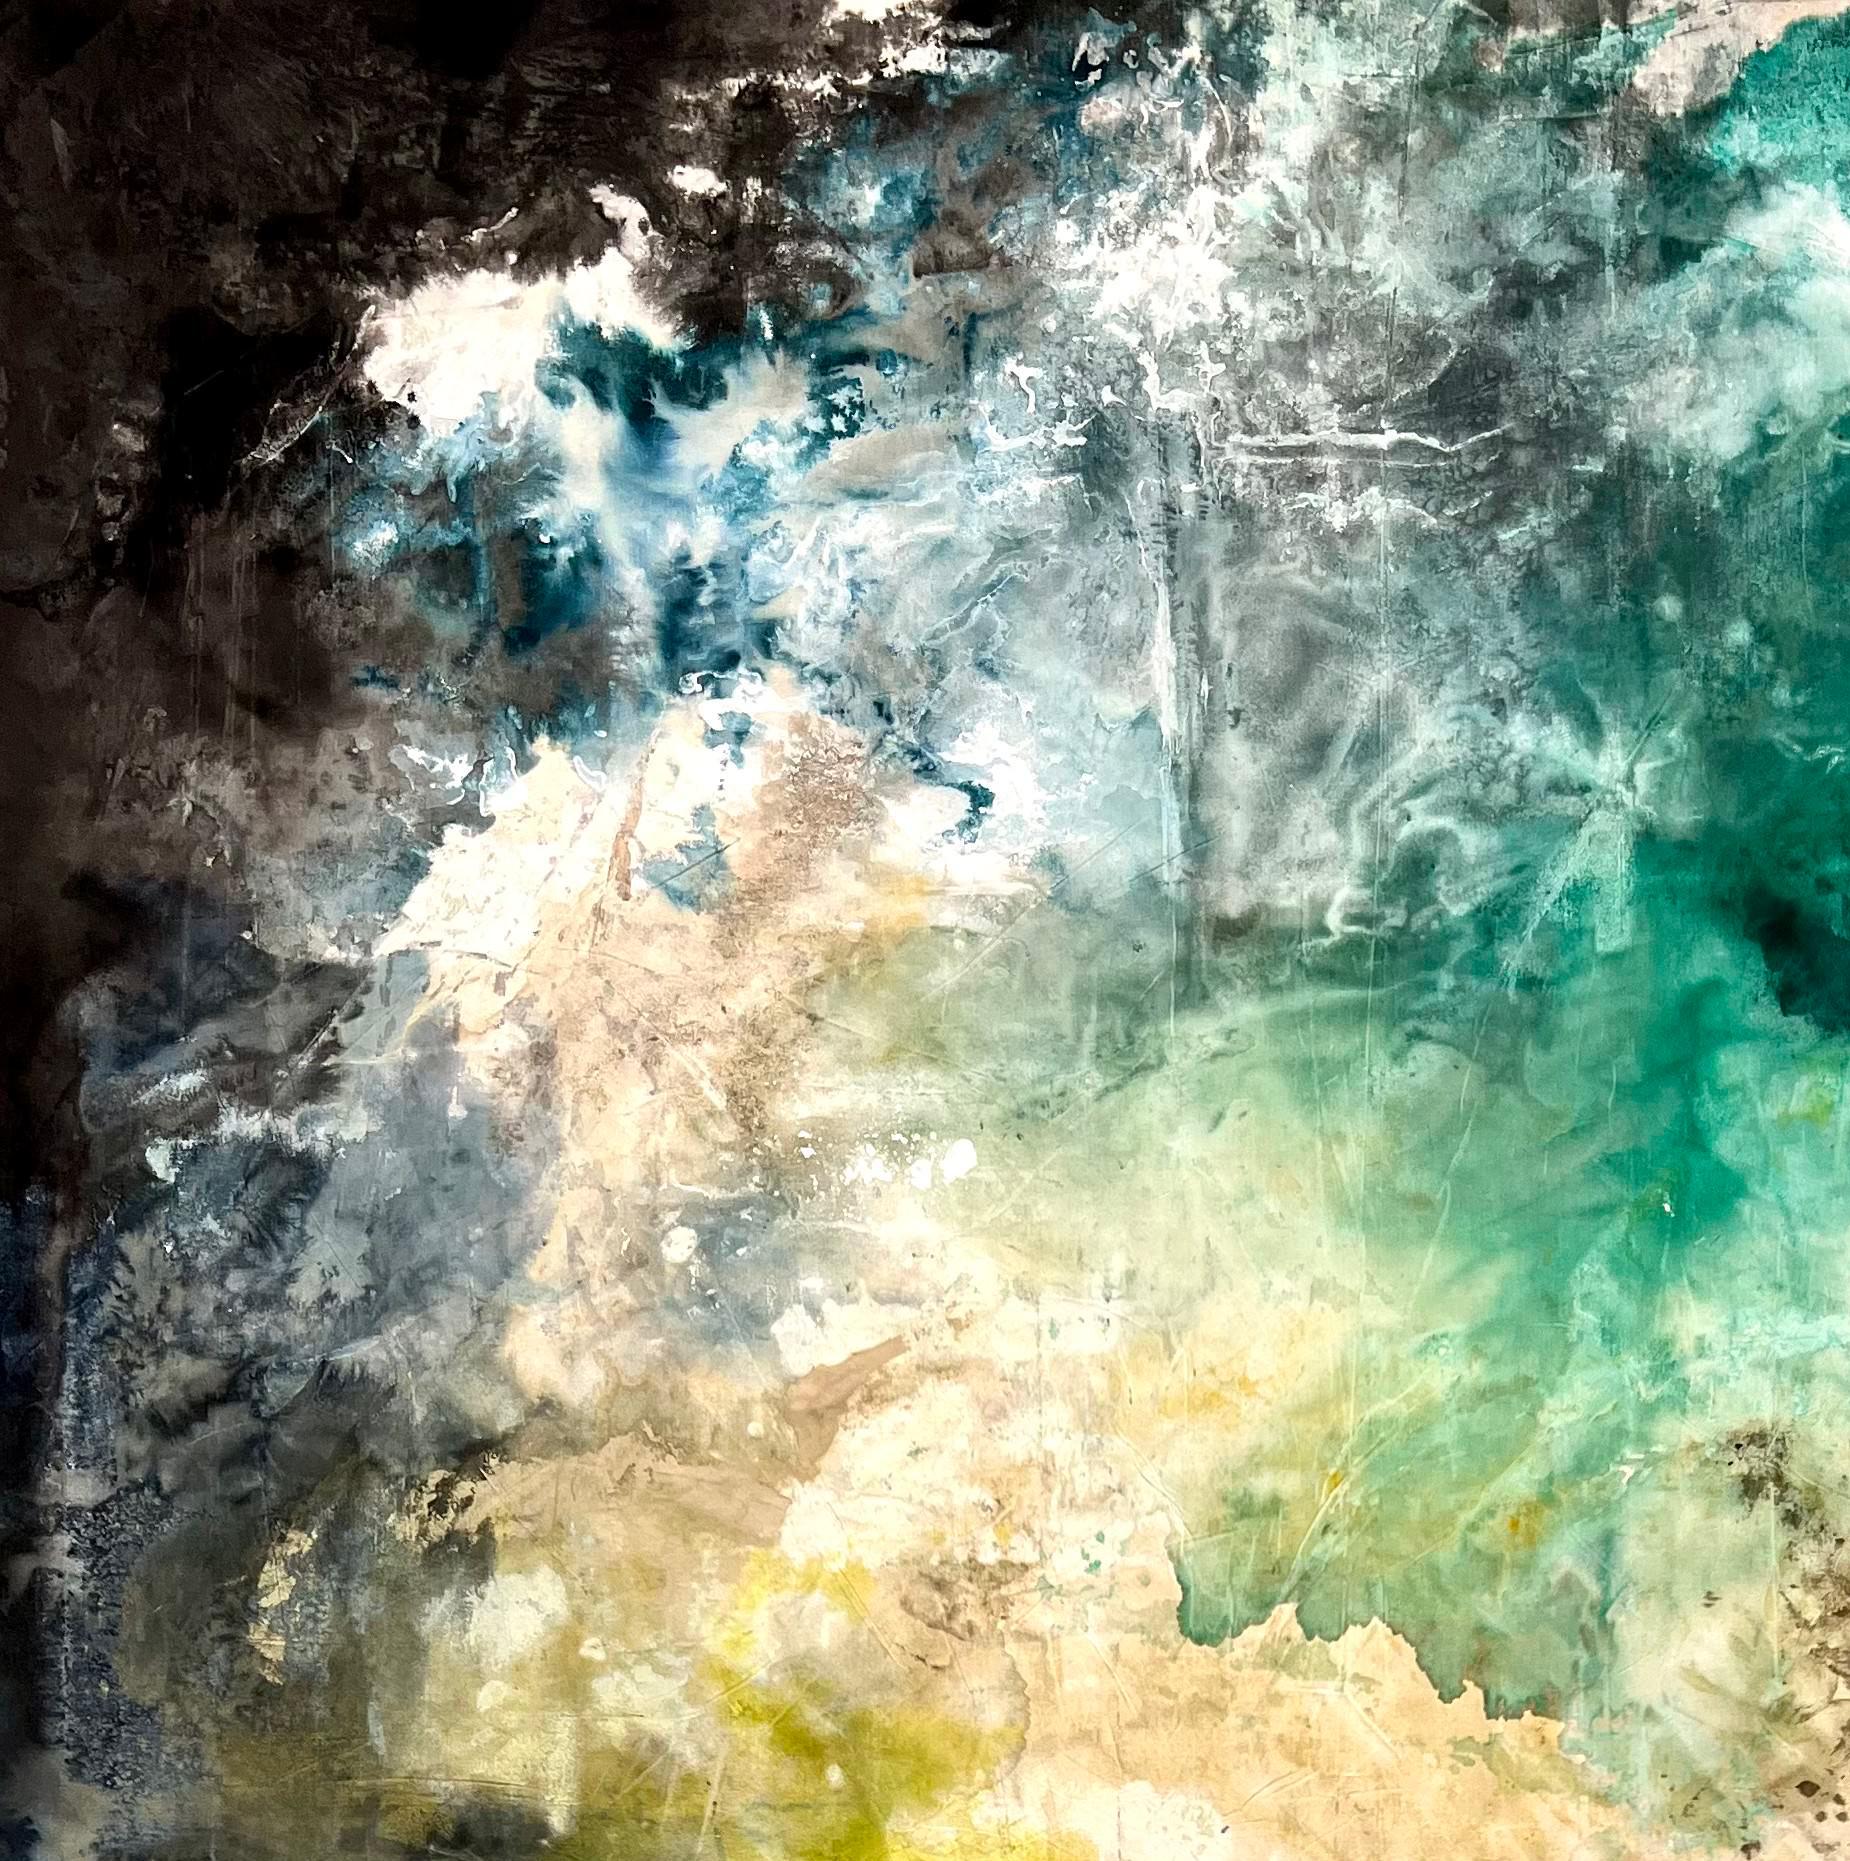 Liquid Life Series n1, 2023 by Rosario Briones
From the series Liquid Life
Mixed media: natural pigments, Indian ink, watercolor, and betum on canvas.
Dimensions: 255 H X 150 W cm.
Unframed
Signed by the artist

The “Liquid Life” series.
About